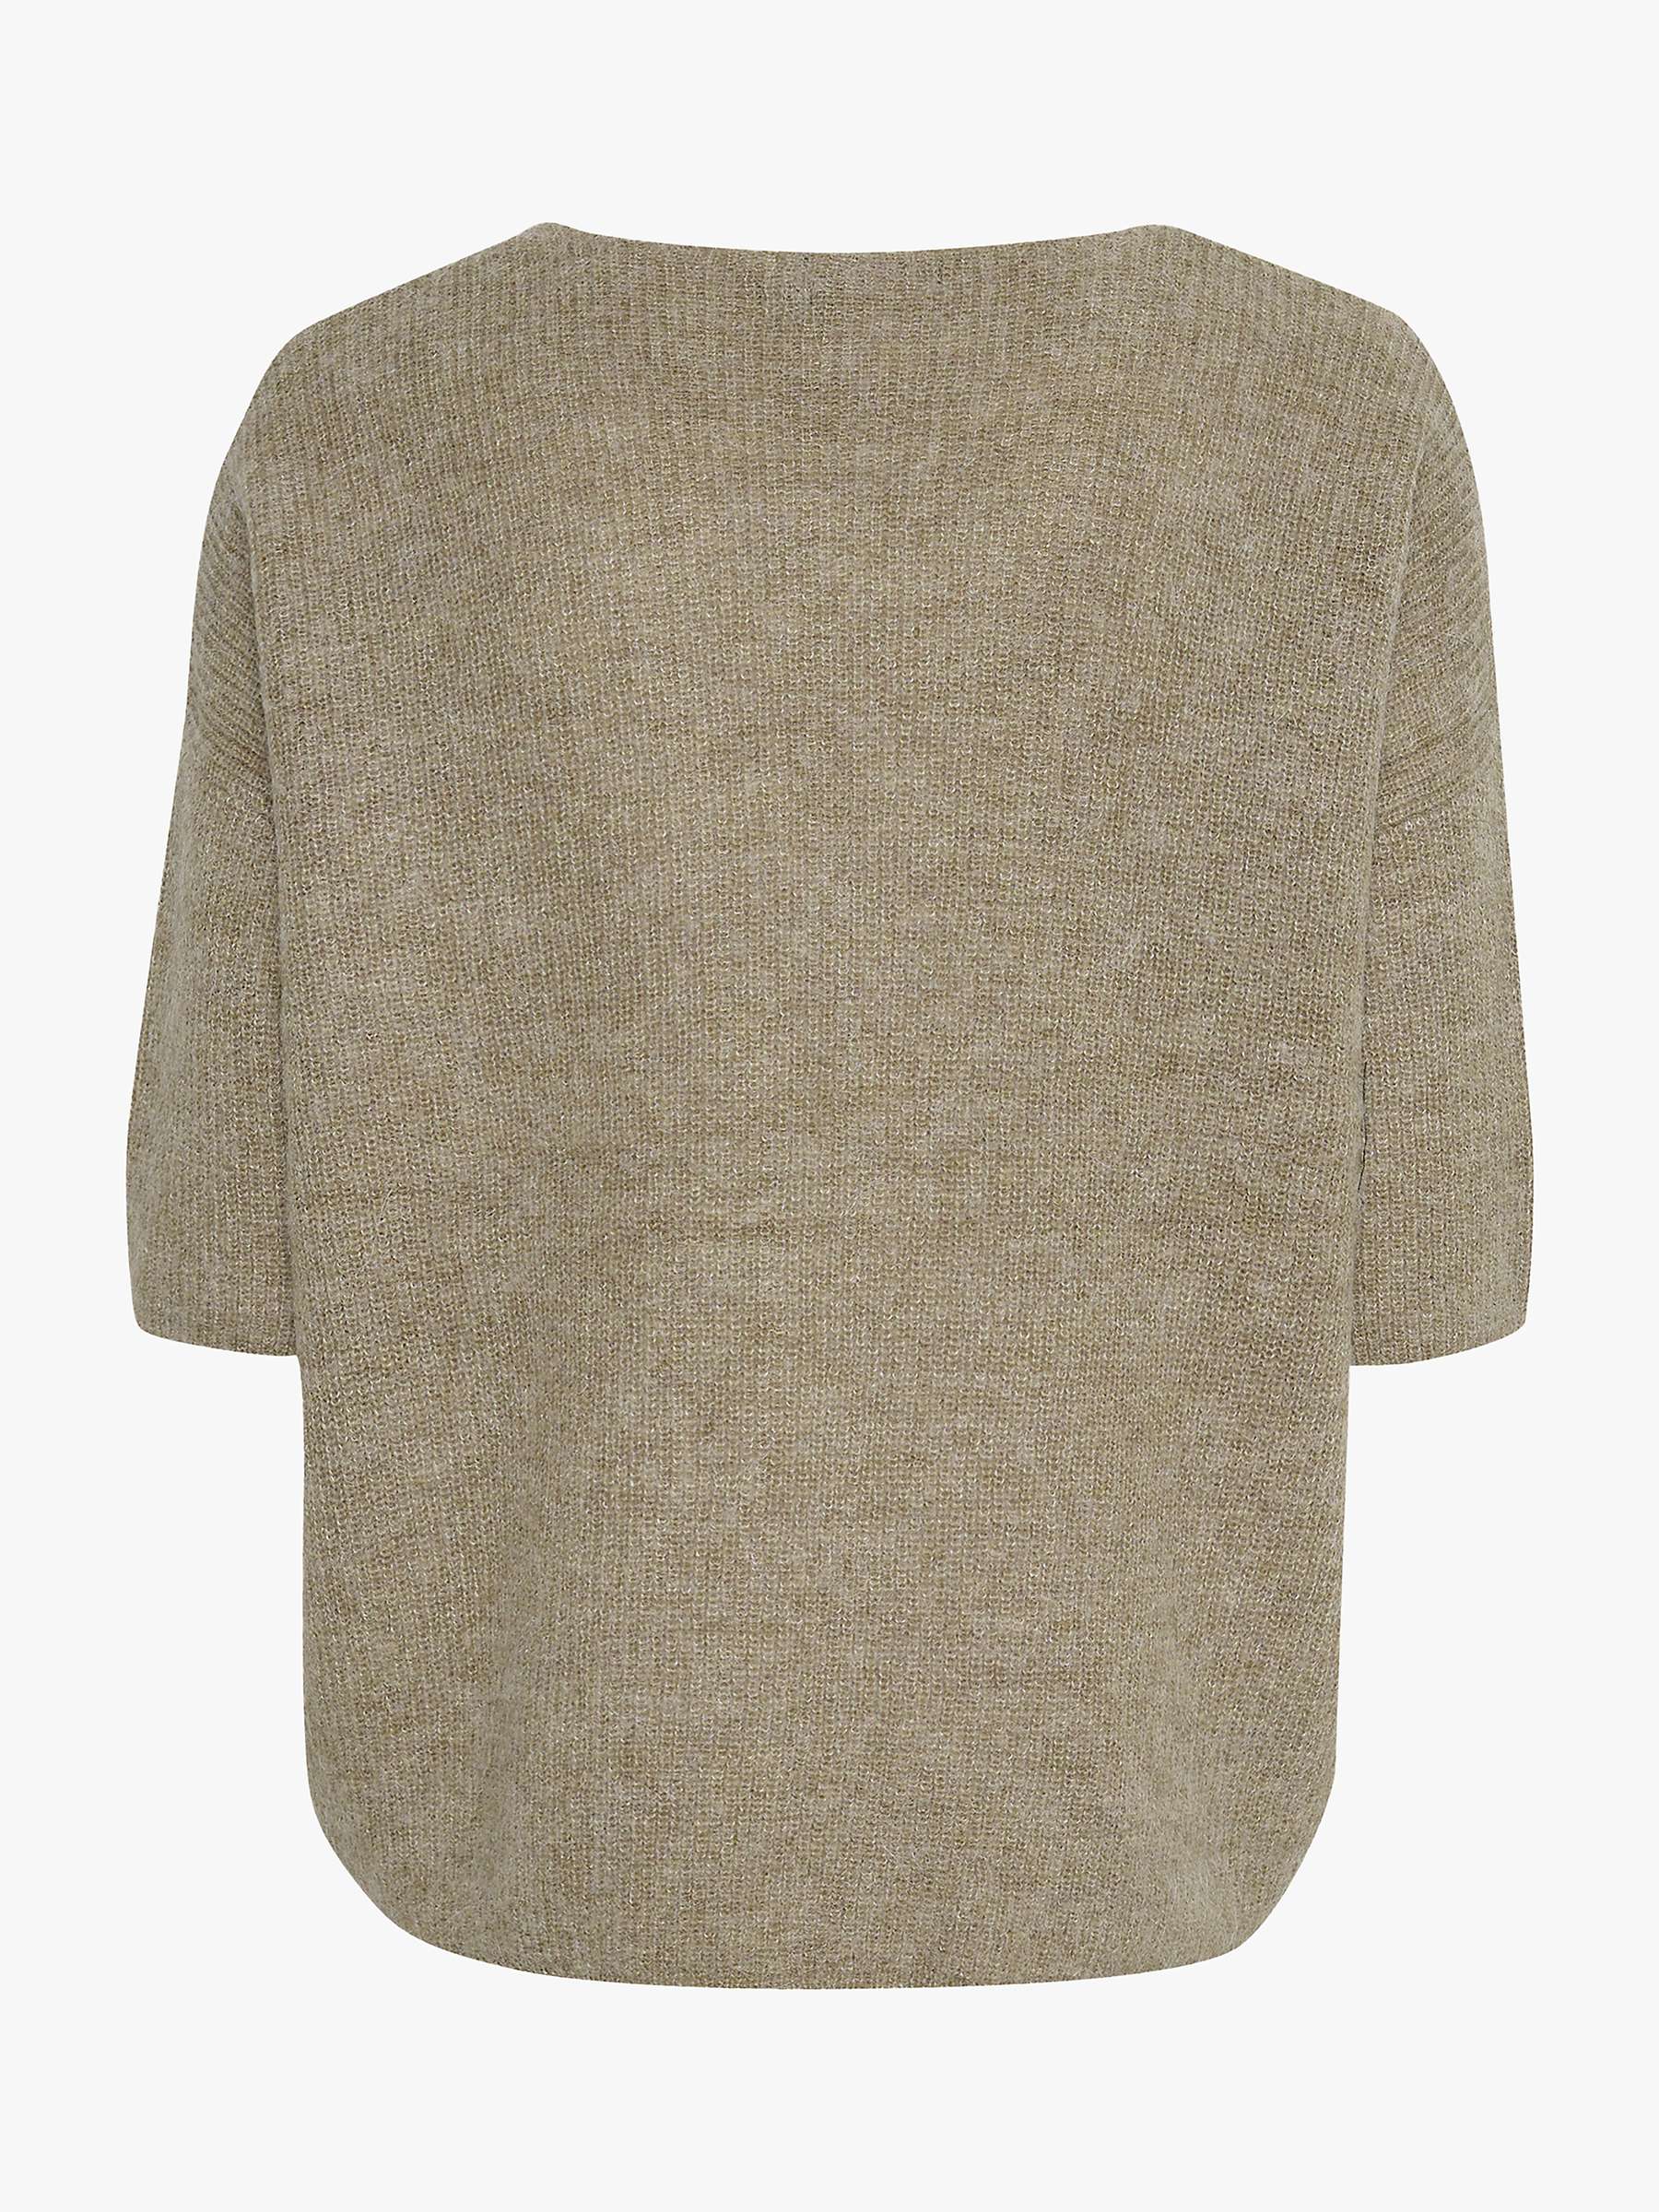 Buy Soaked In Luxury Tuesday Jumper Online at johnlewis.com